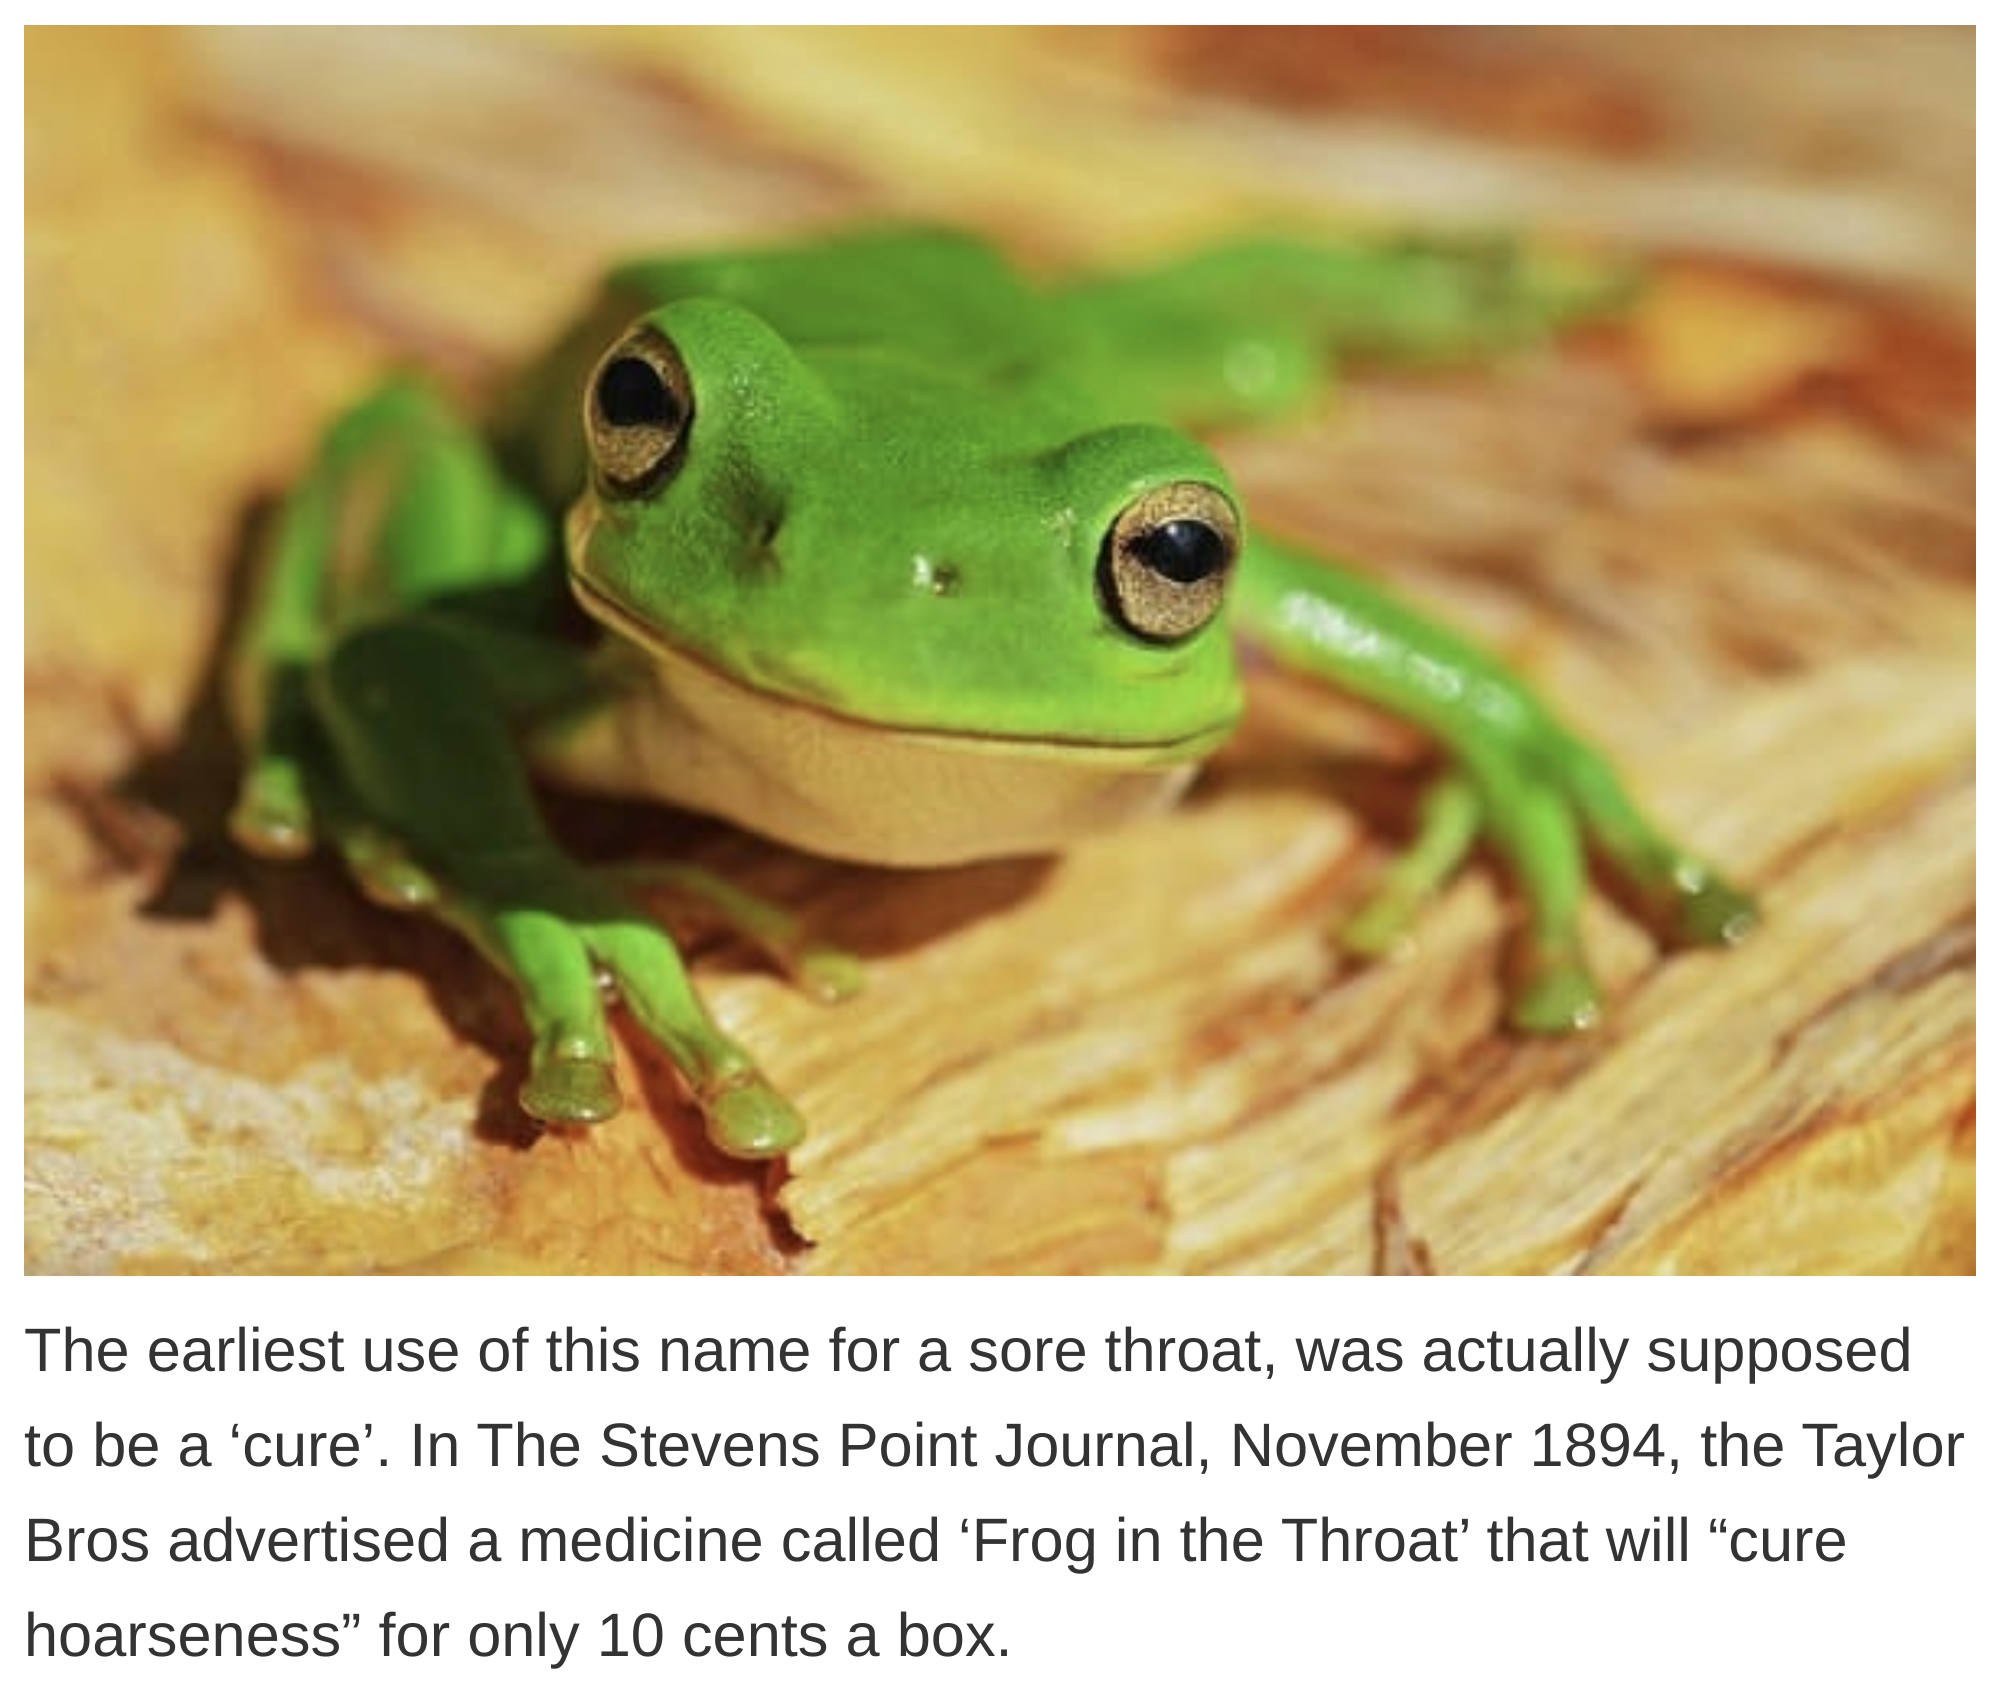 etymology english language - The earliest use of this name for a sore throat, was actually supposed to be a 'cure'. In The Stevens Point Journal, , the Taylor Bros advertised a medicine called 'Frog in the Throat' that will